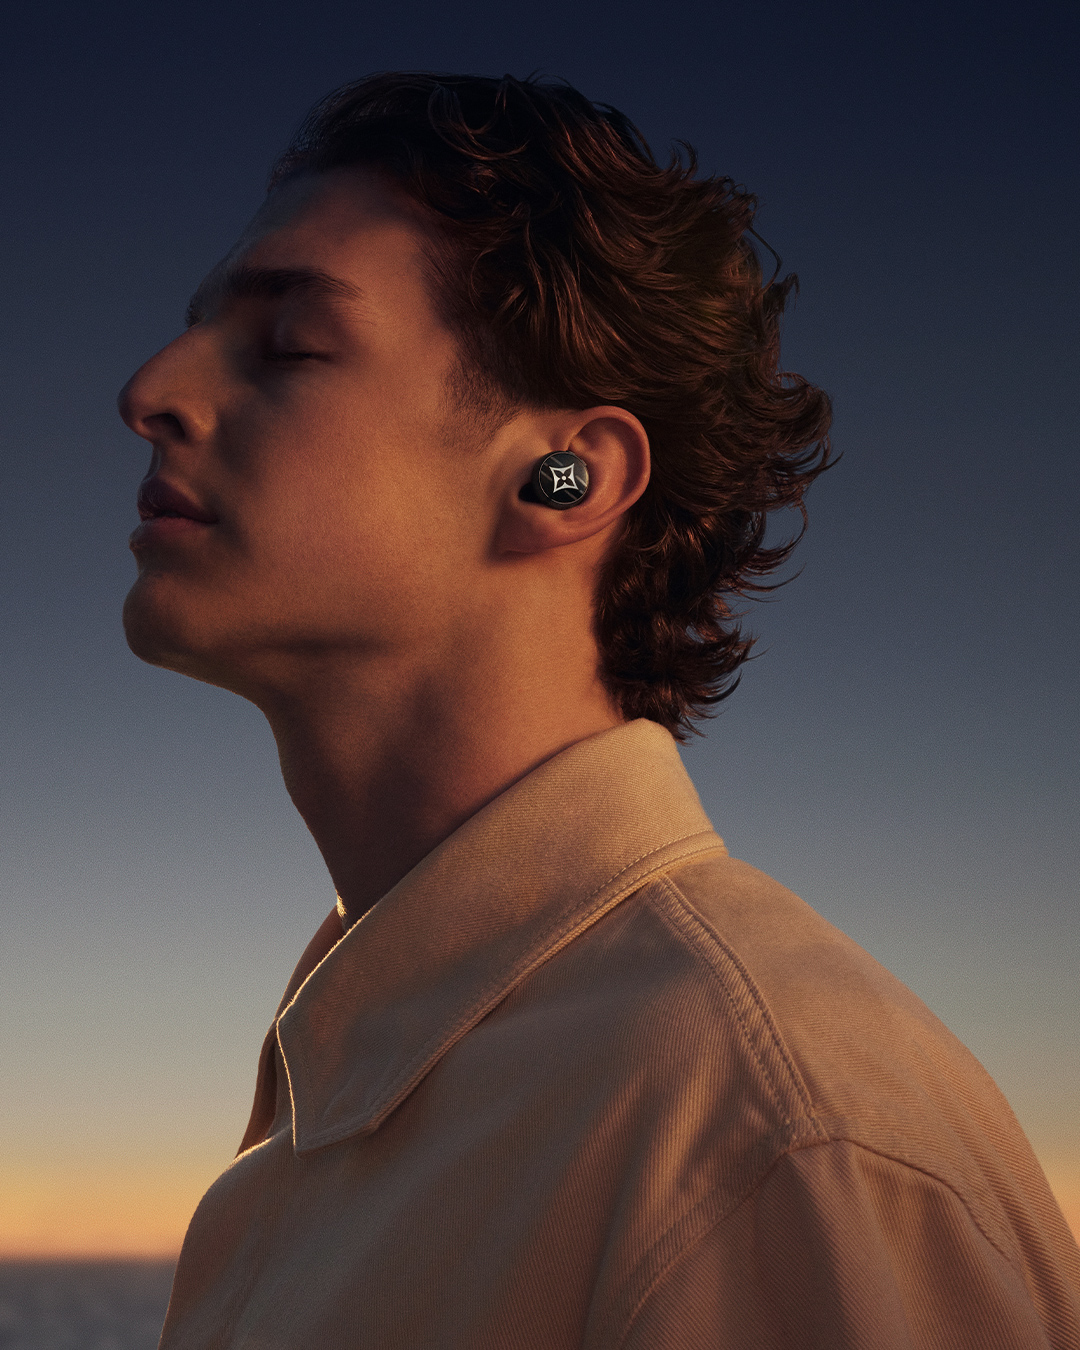 Louis Vuitton on X: A unique audio experience. The #LouisVuitton Horizon  Light Up Earphones feature hybrid active noise cancellation, creating a  world of immersive sound. Learn about the third-generation earphones at   #